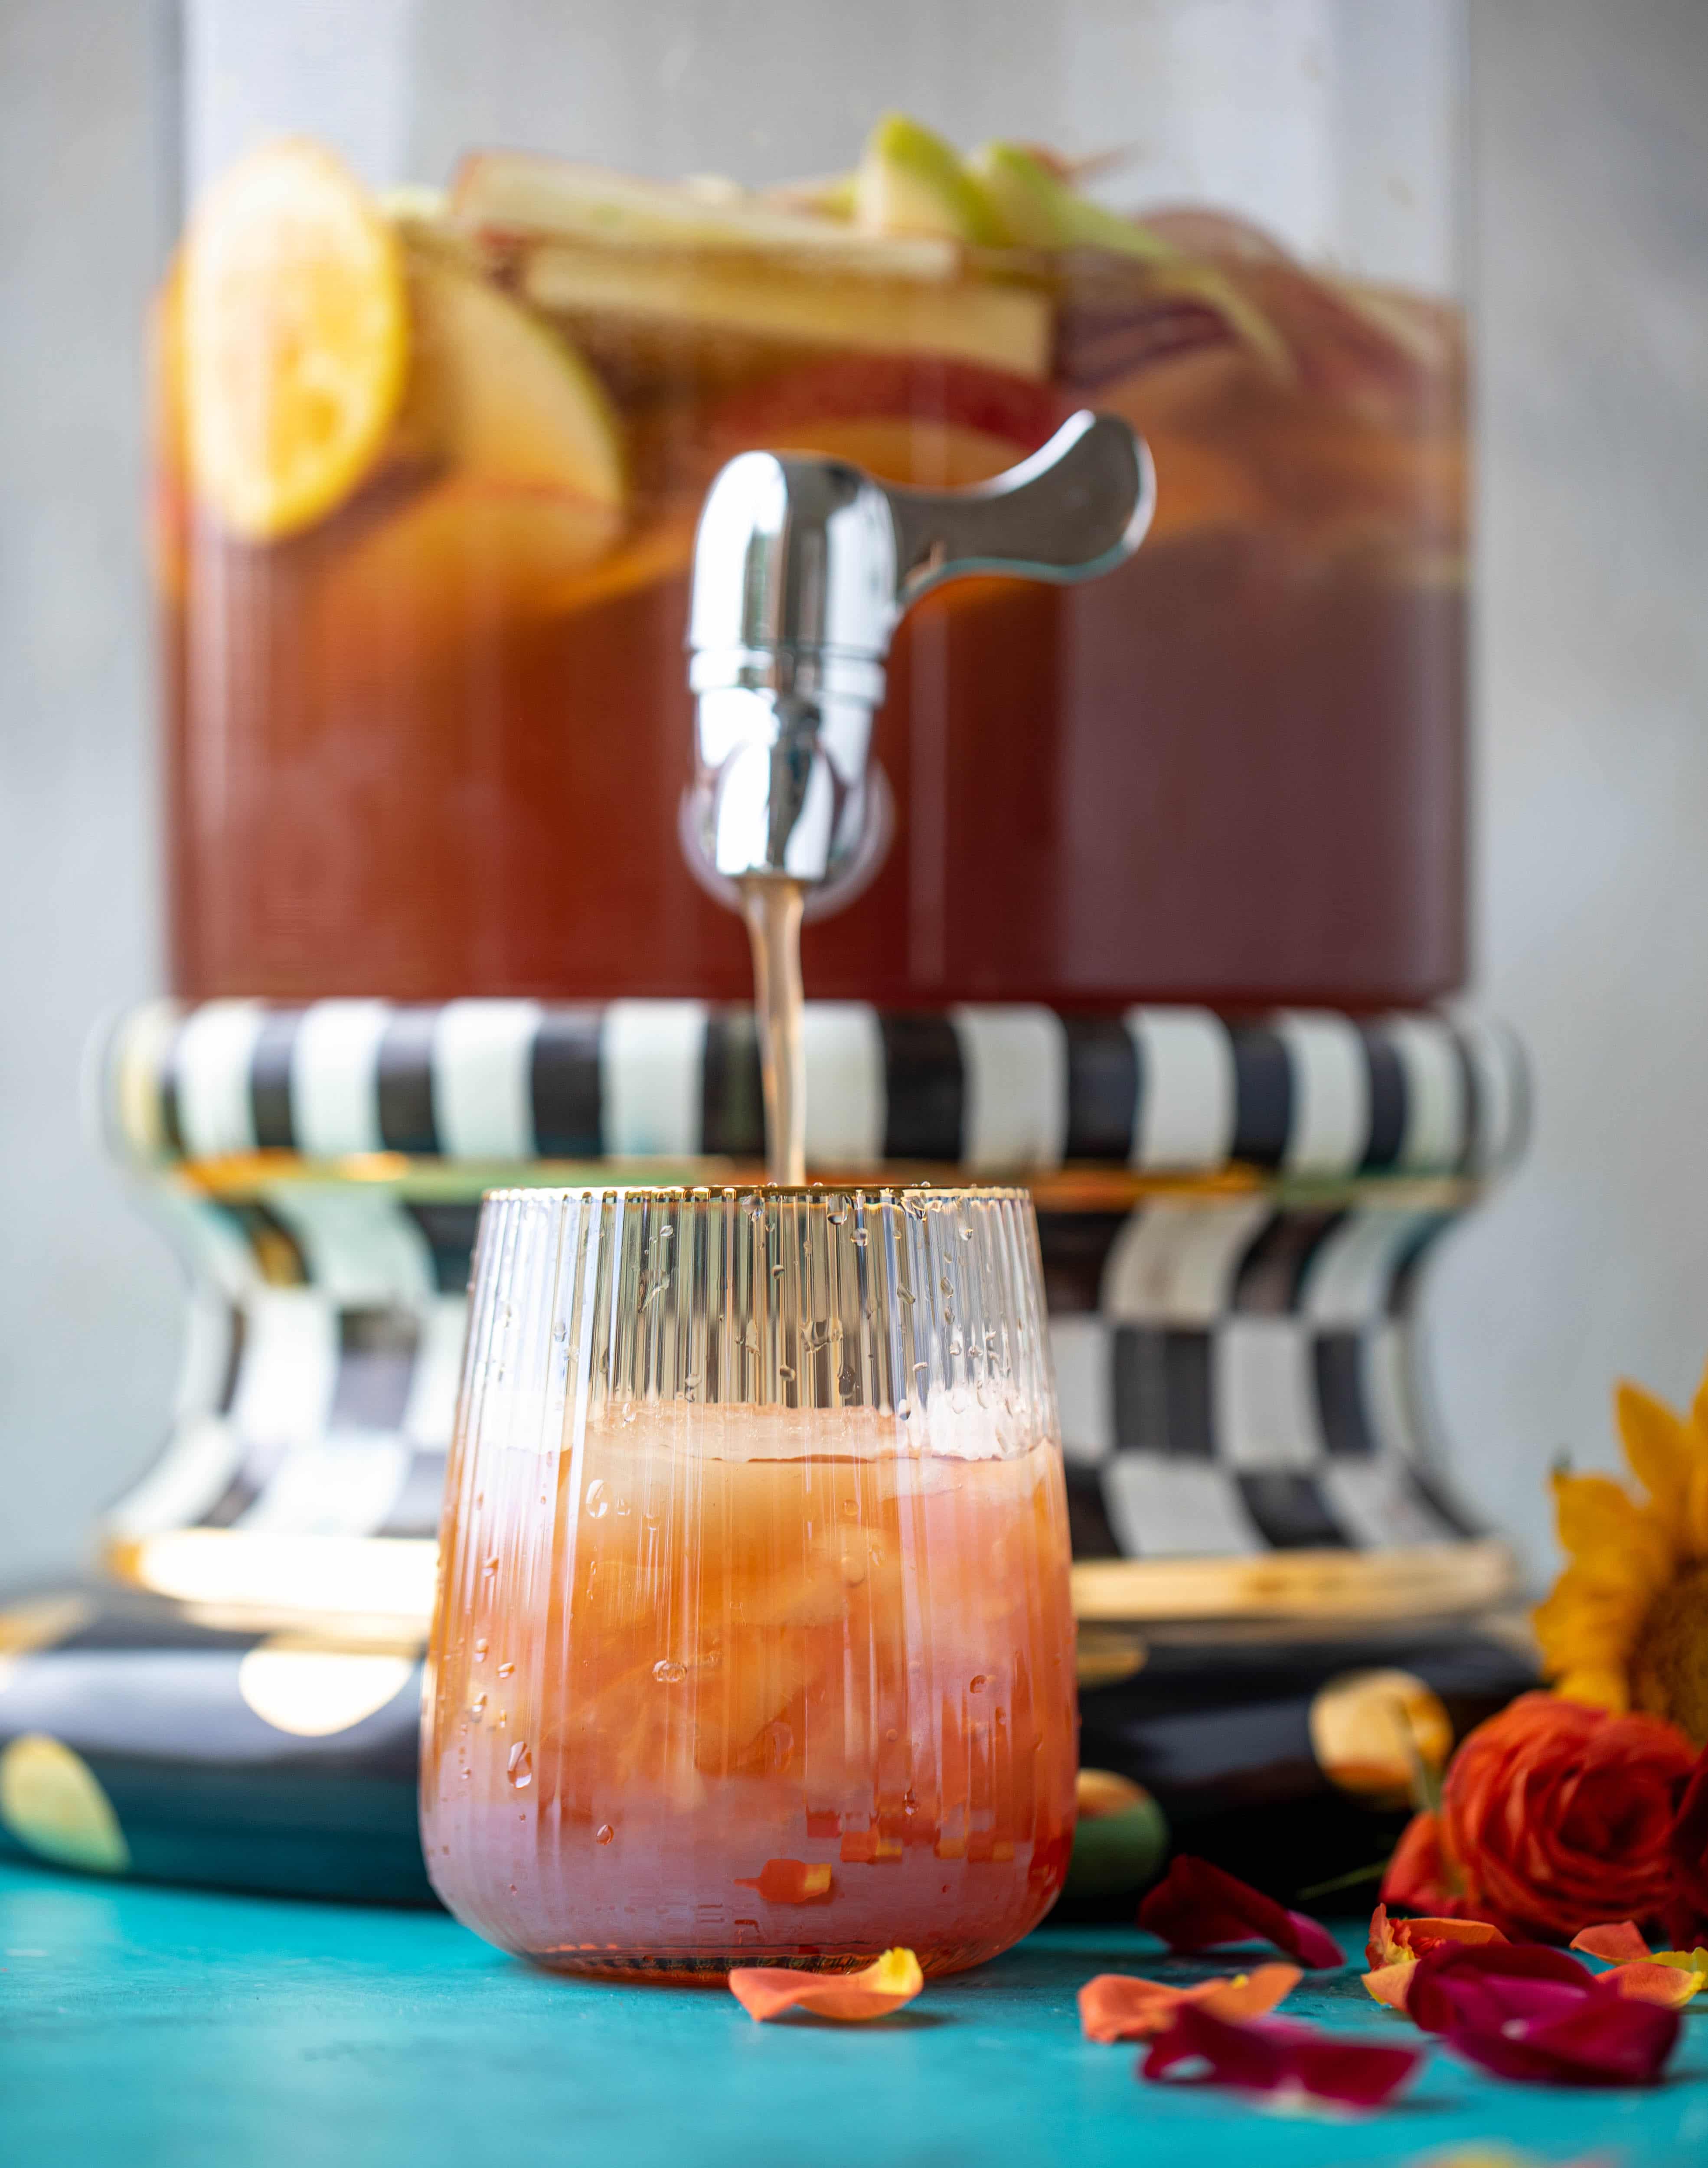 This apple cider punch recipe has tons of fall flavor! Apple cider, aperol, pomegranate soda and prosecco come together to create a bubbly treat!